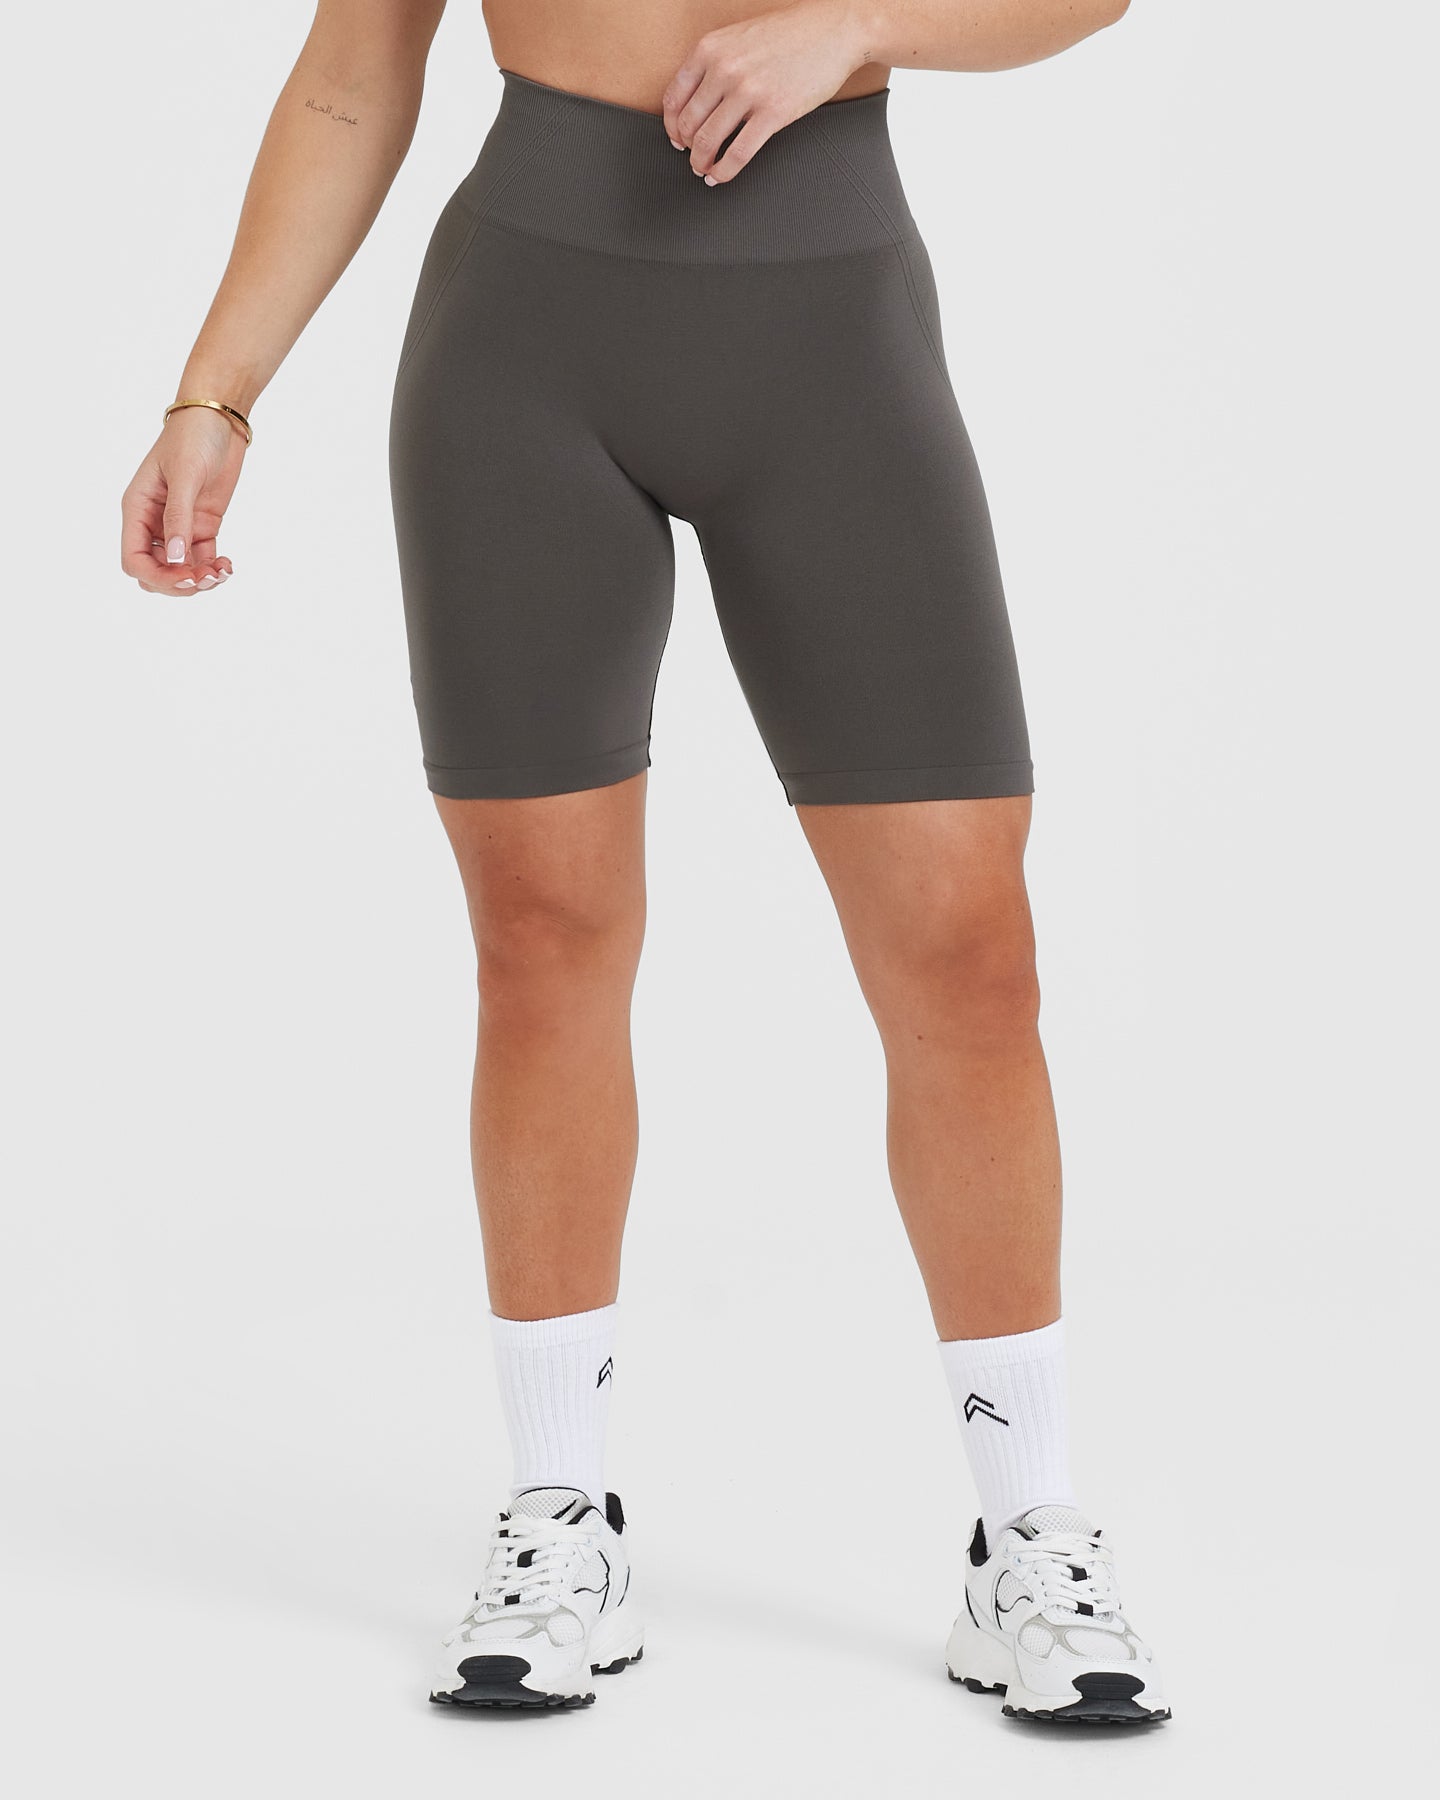 FEMALE CYCLING SHORTS - DEEP TAUPE | Oner Active US